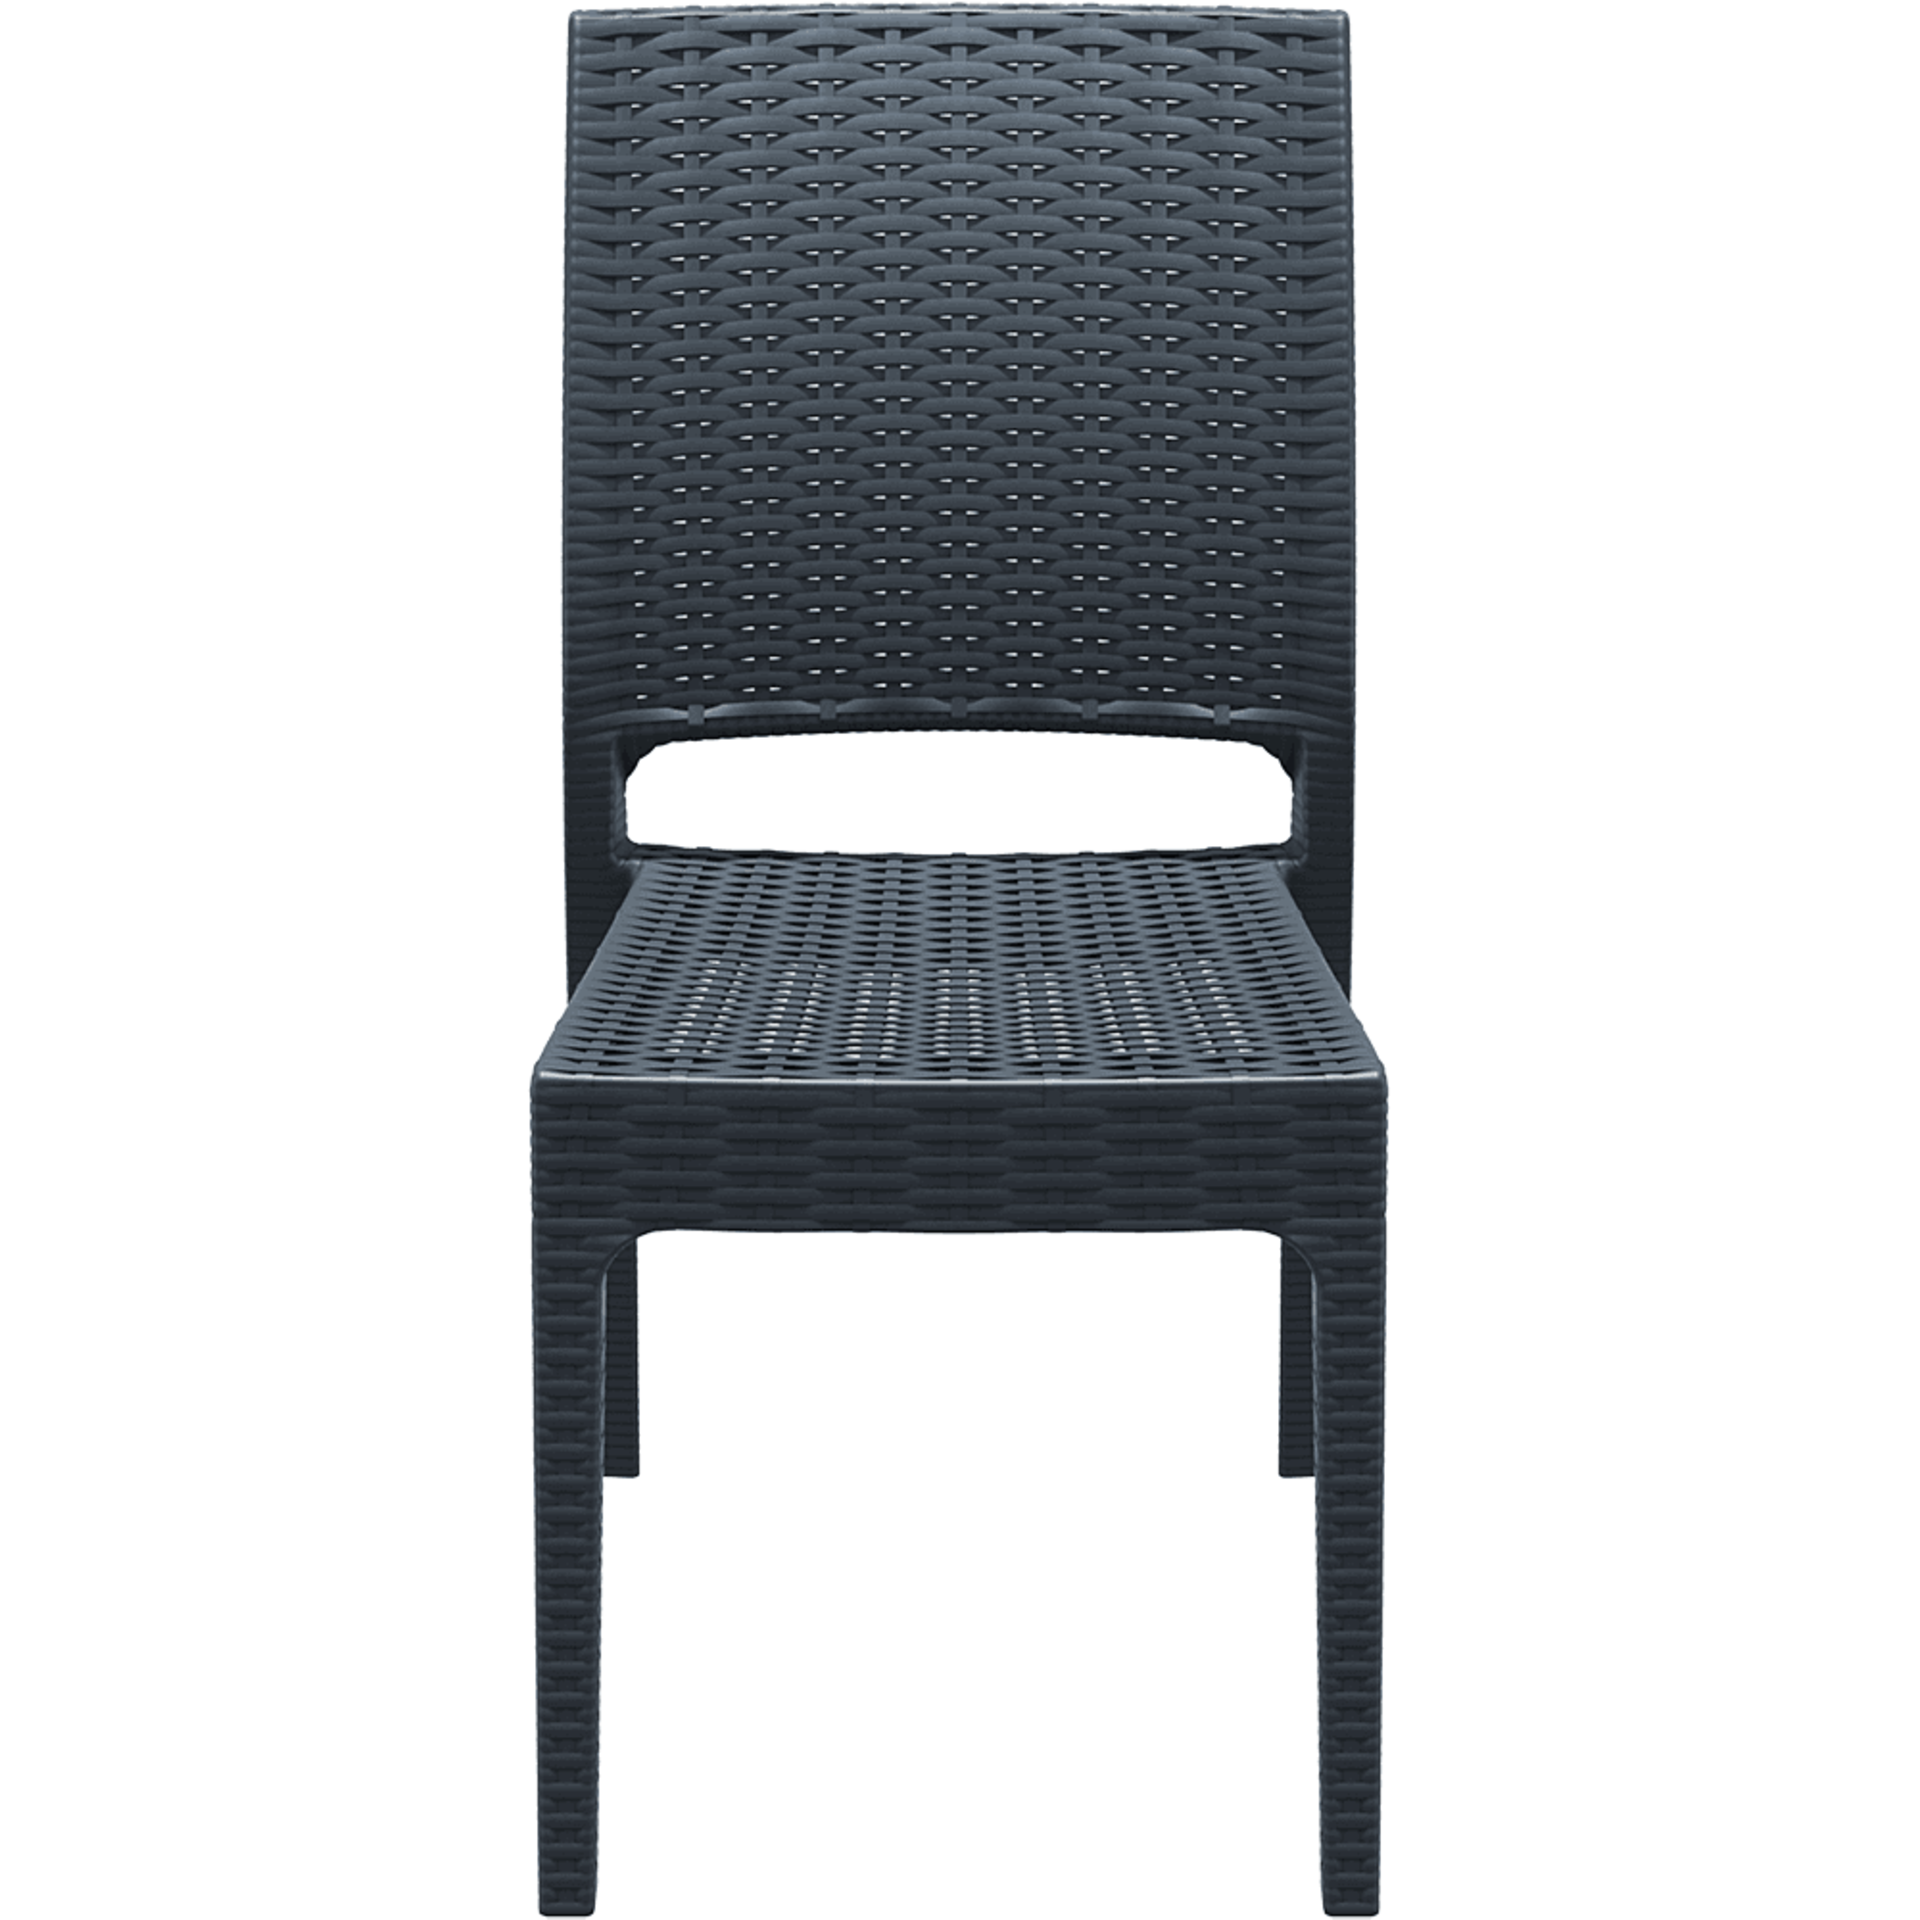 4 x Siesta 'Florida' Rattan Style Garden Chairs In Dark Grey - Suitable For Commercial or Home Use - - Image 20 of 21